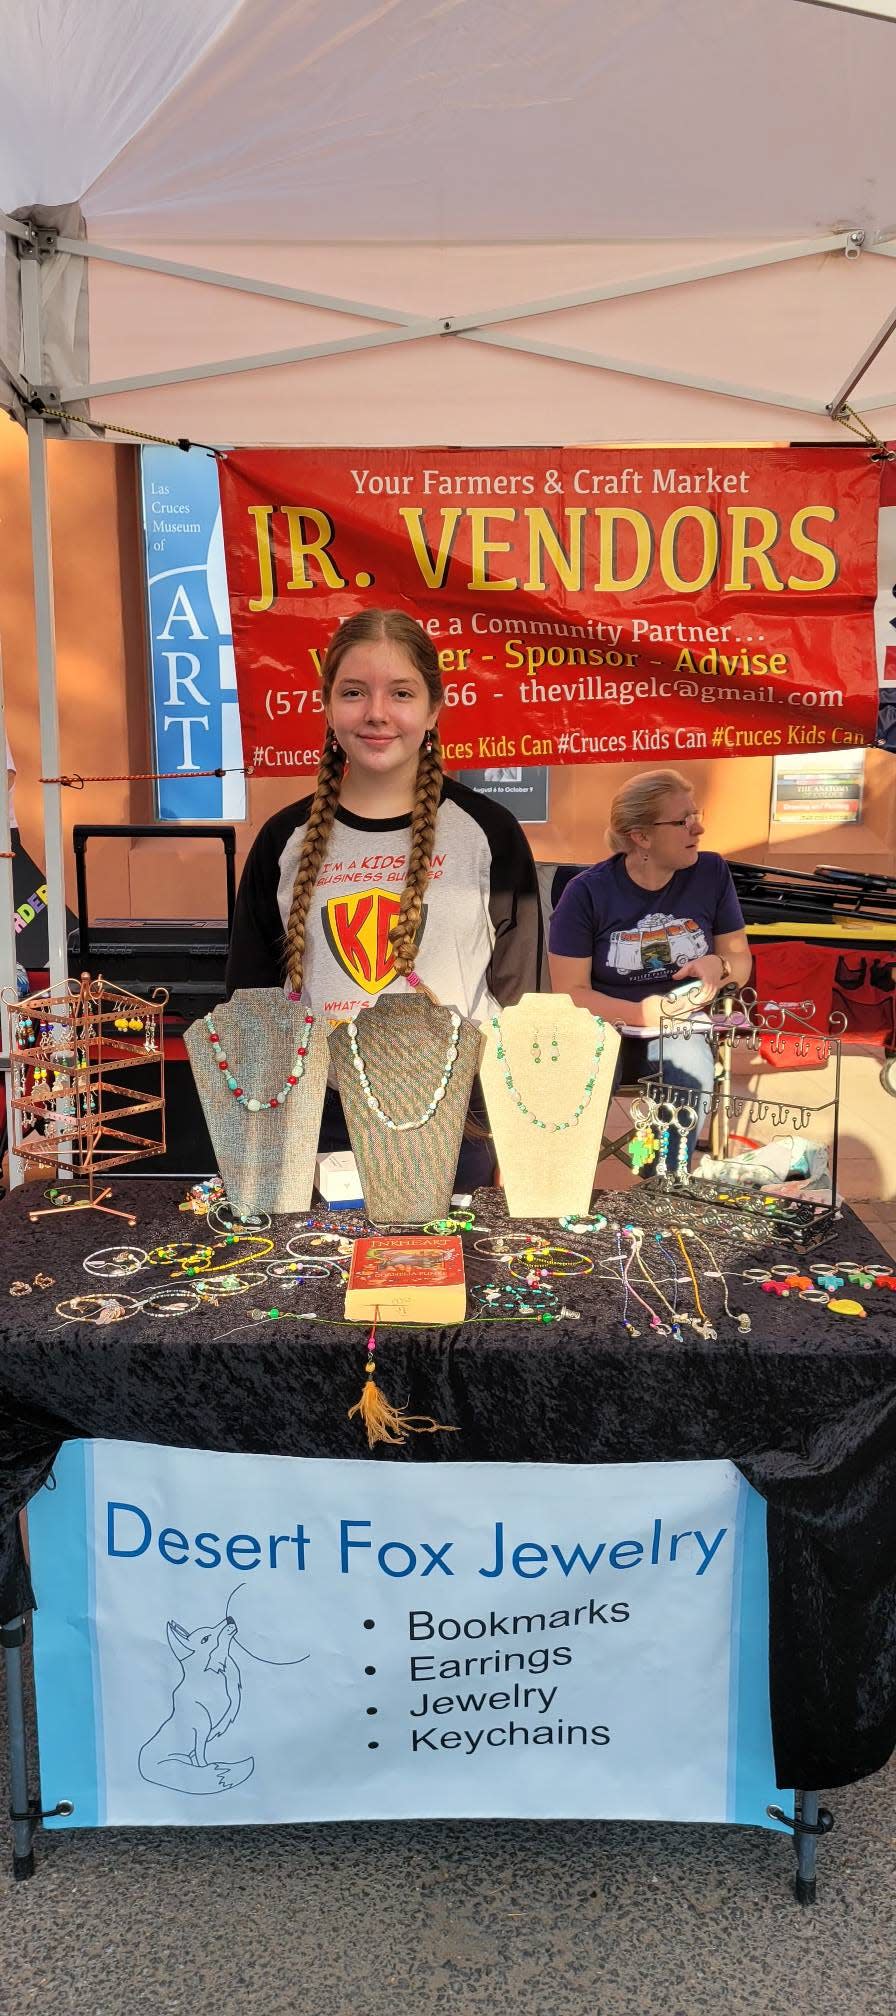 Though Kids Can activities have not been as public-facing these last couple of years, the organization's mission to inspire the entrepreneurial spirit within youth aged 6-17 has not slowed down.